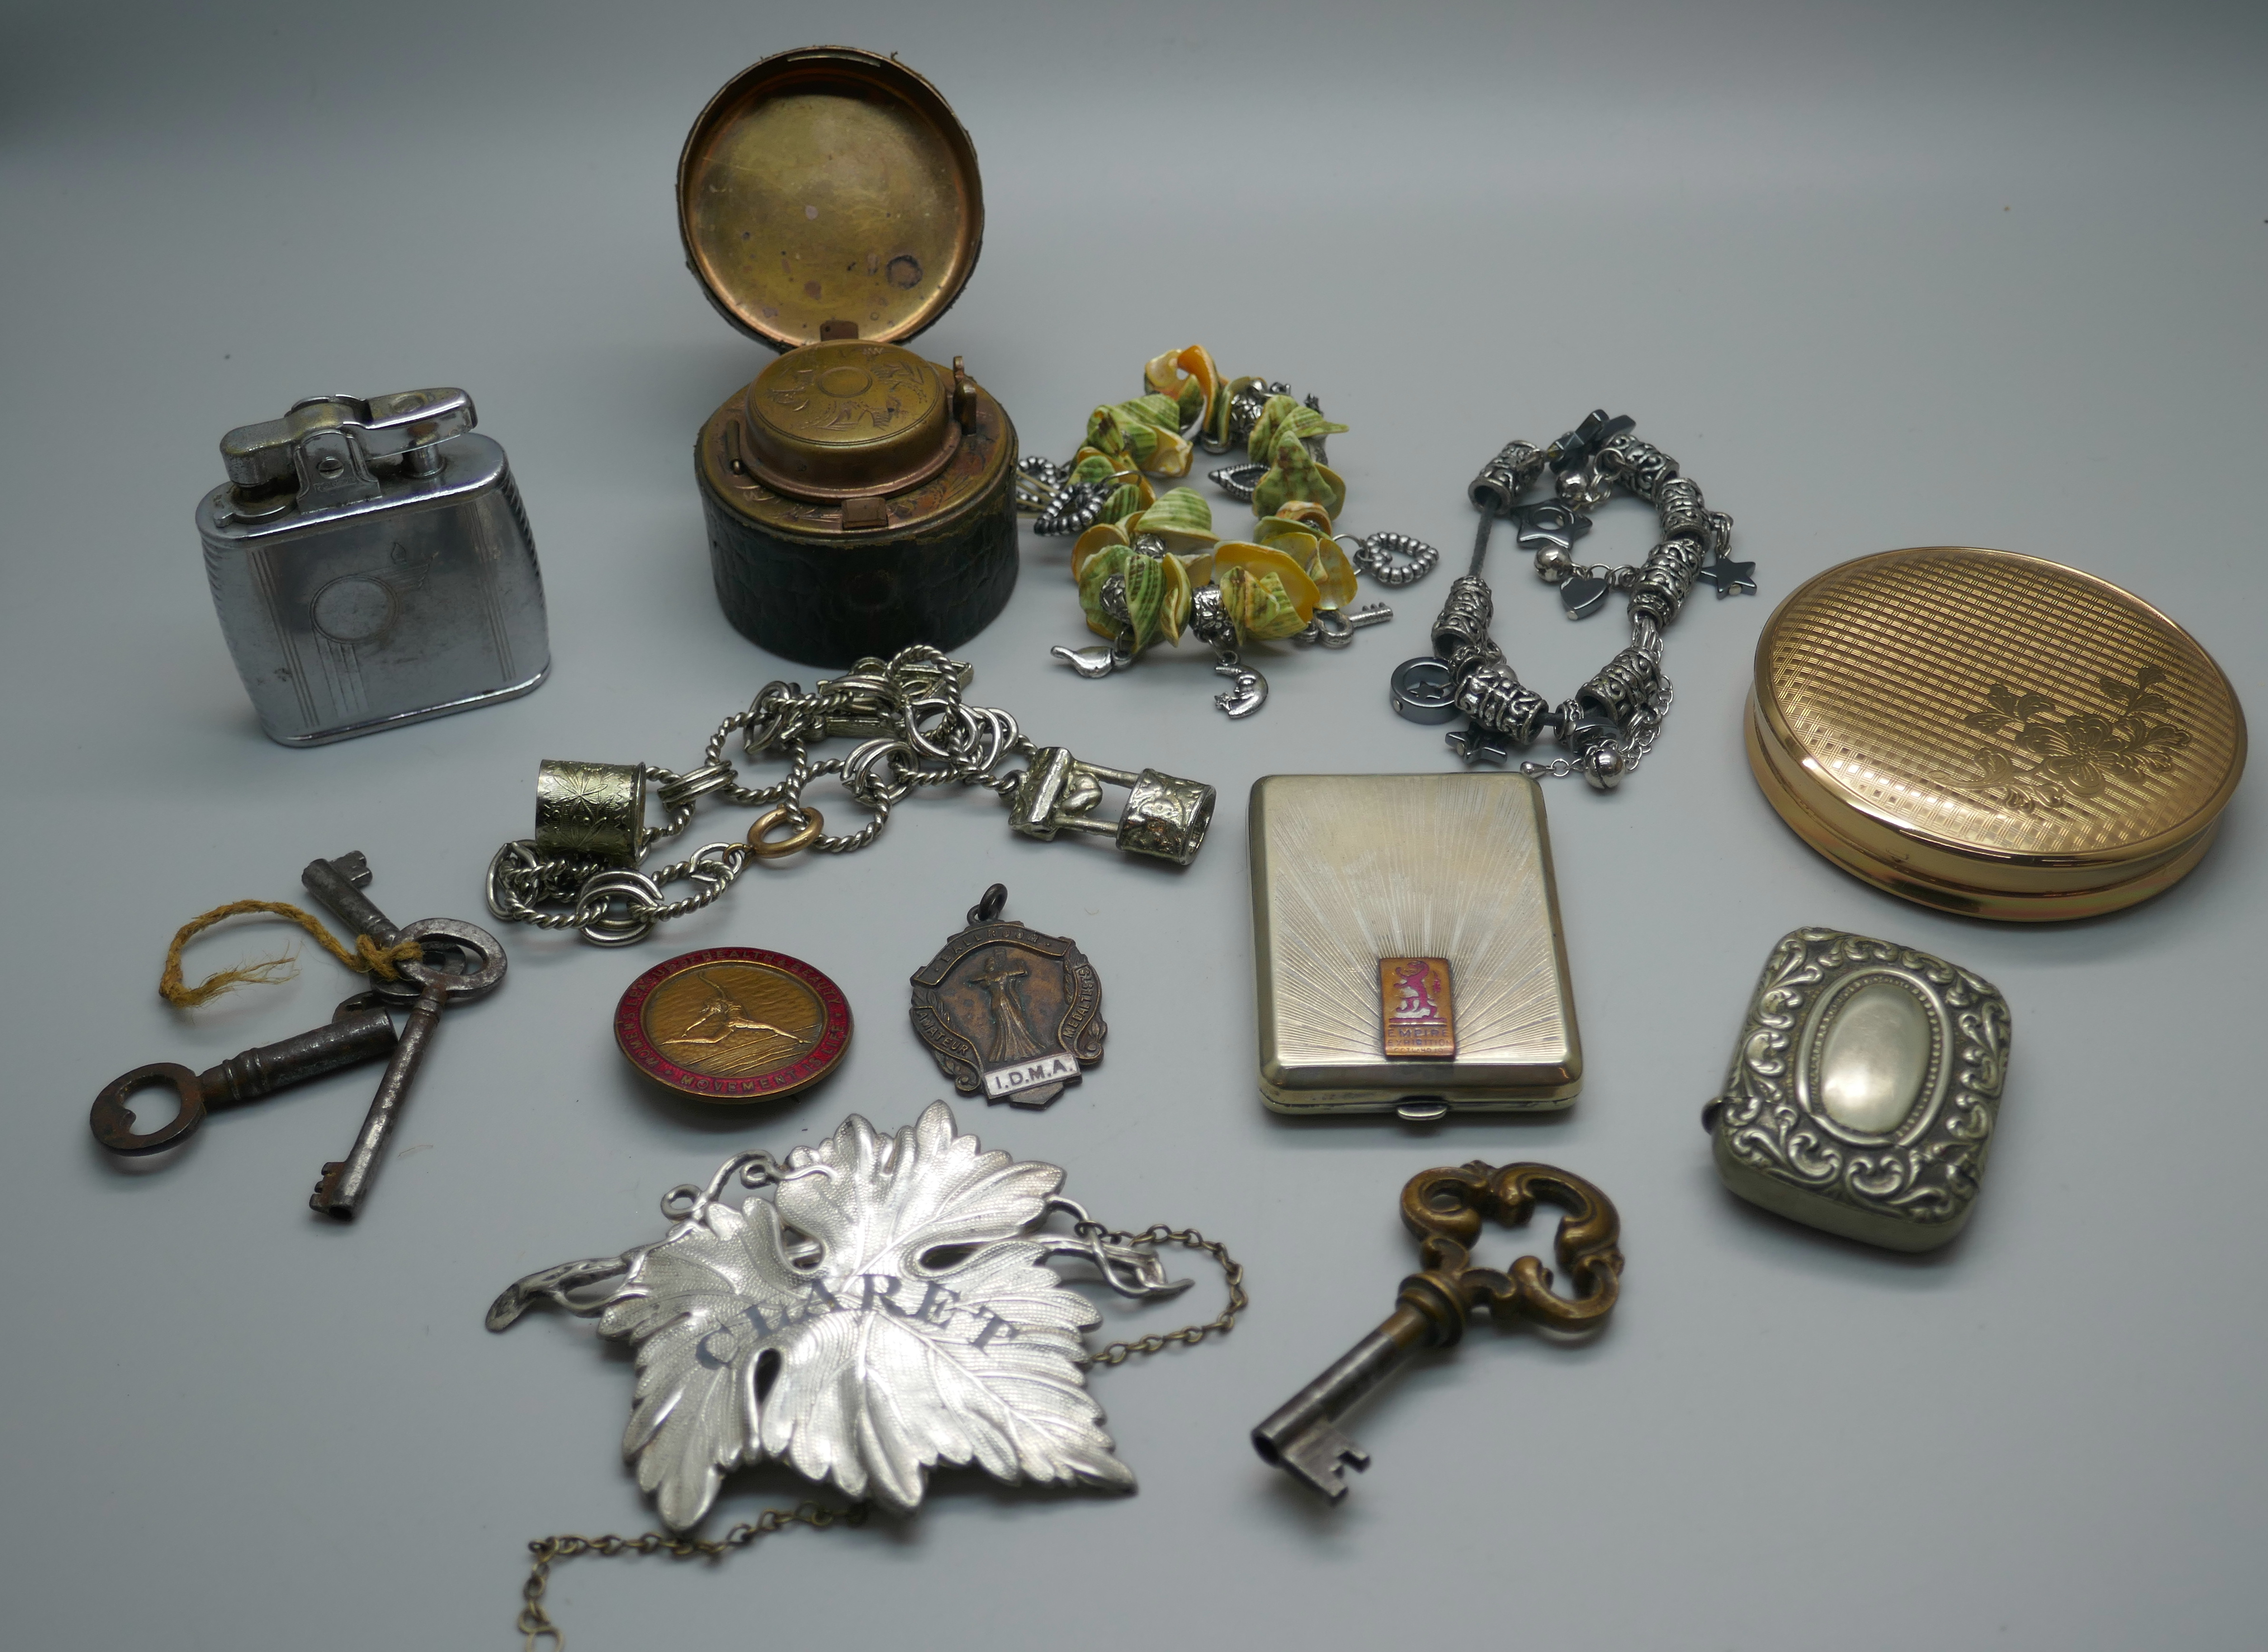 A powder case, a claret decanter label, an inkwell, a lighter, three bracelets with charms, a